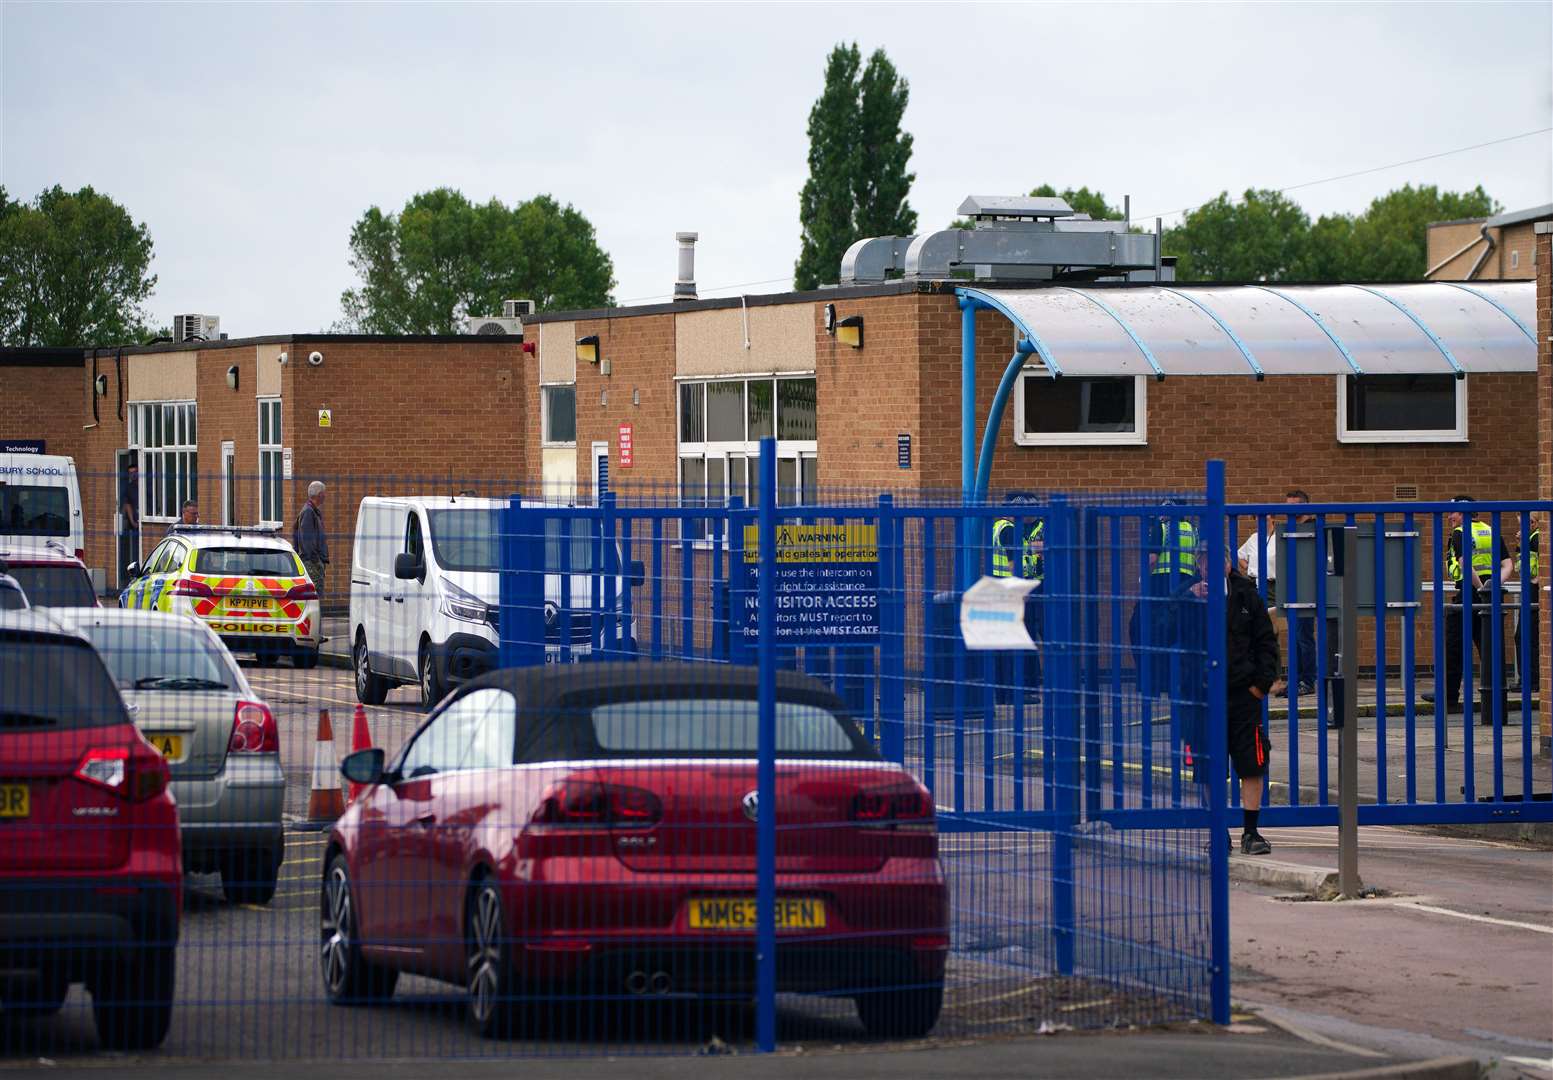 Tewkesbury Academy was put in lockdown after the stabbing (PA)